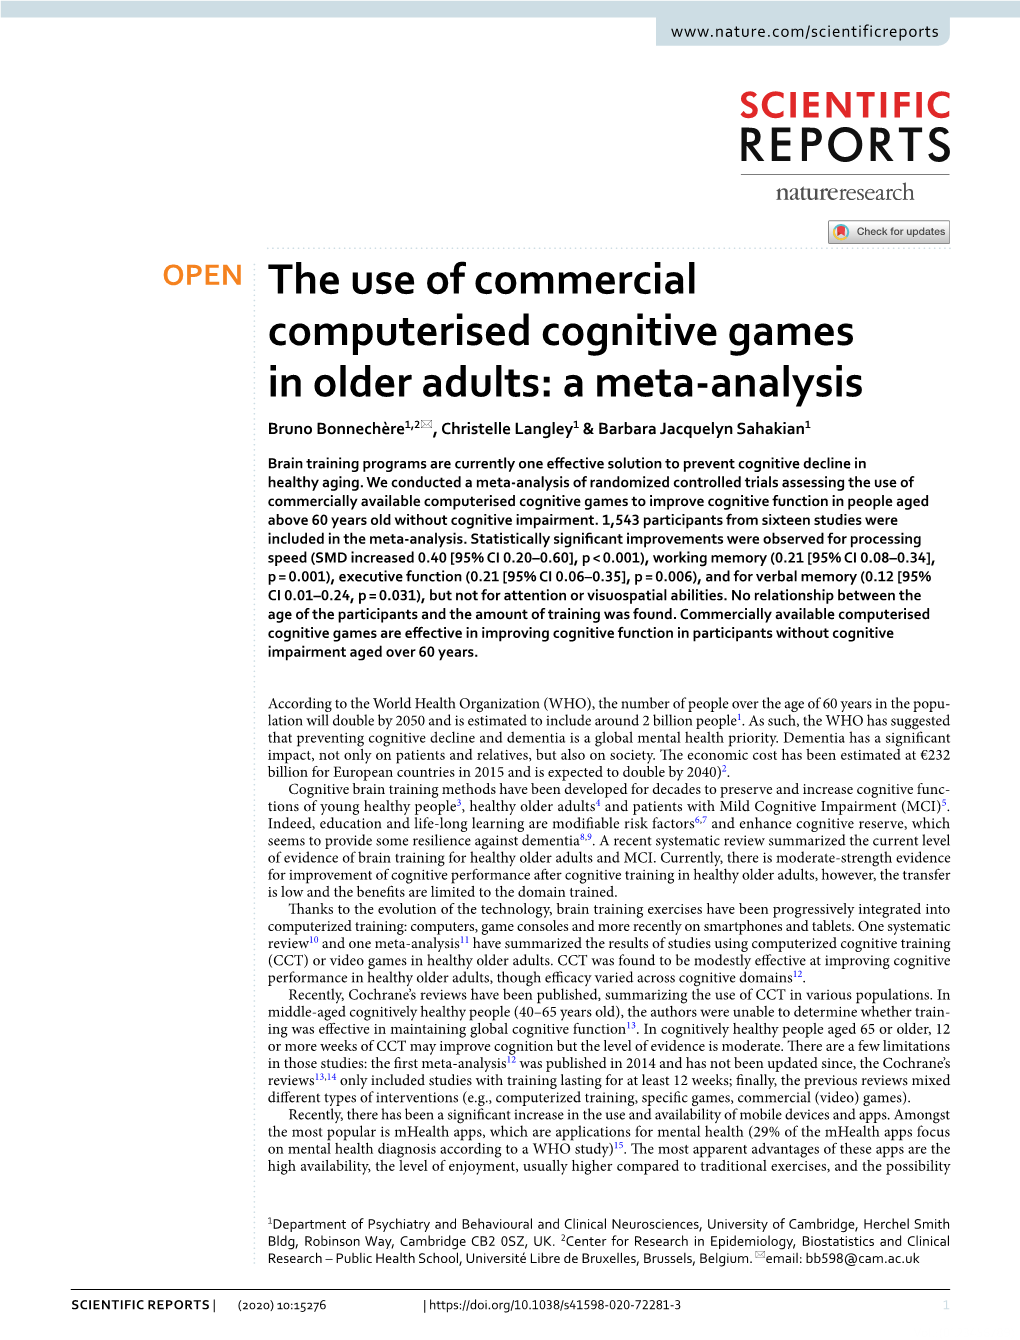 The Use of Commercial Computerised Cognitive Games in Older Adults: a Meta‑Analysis Bruno Bonnechère1,2*, Christelle Langley1 & Barbara Jacquelyn Sahakian1